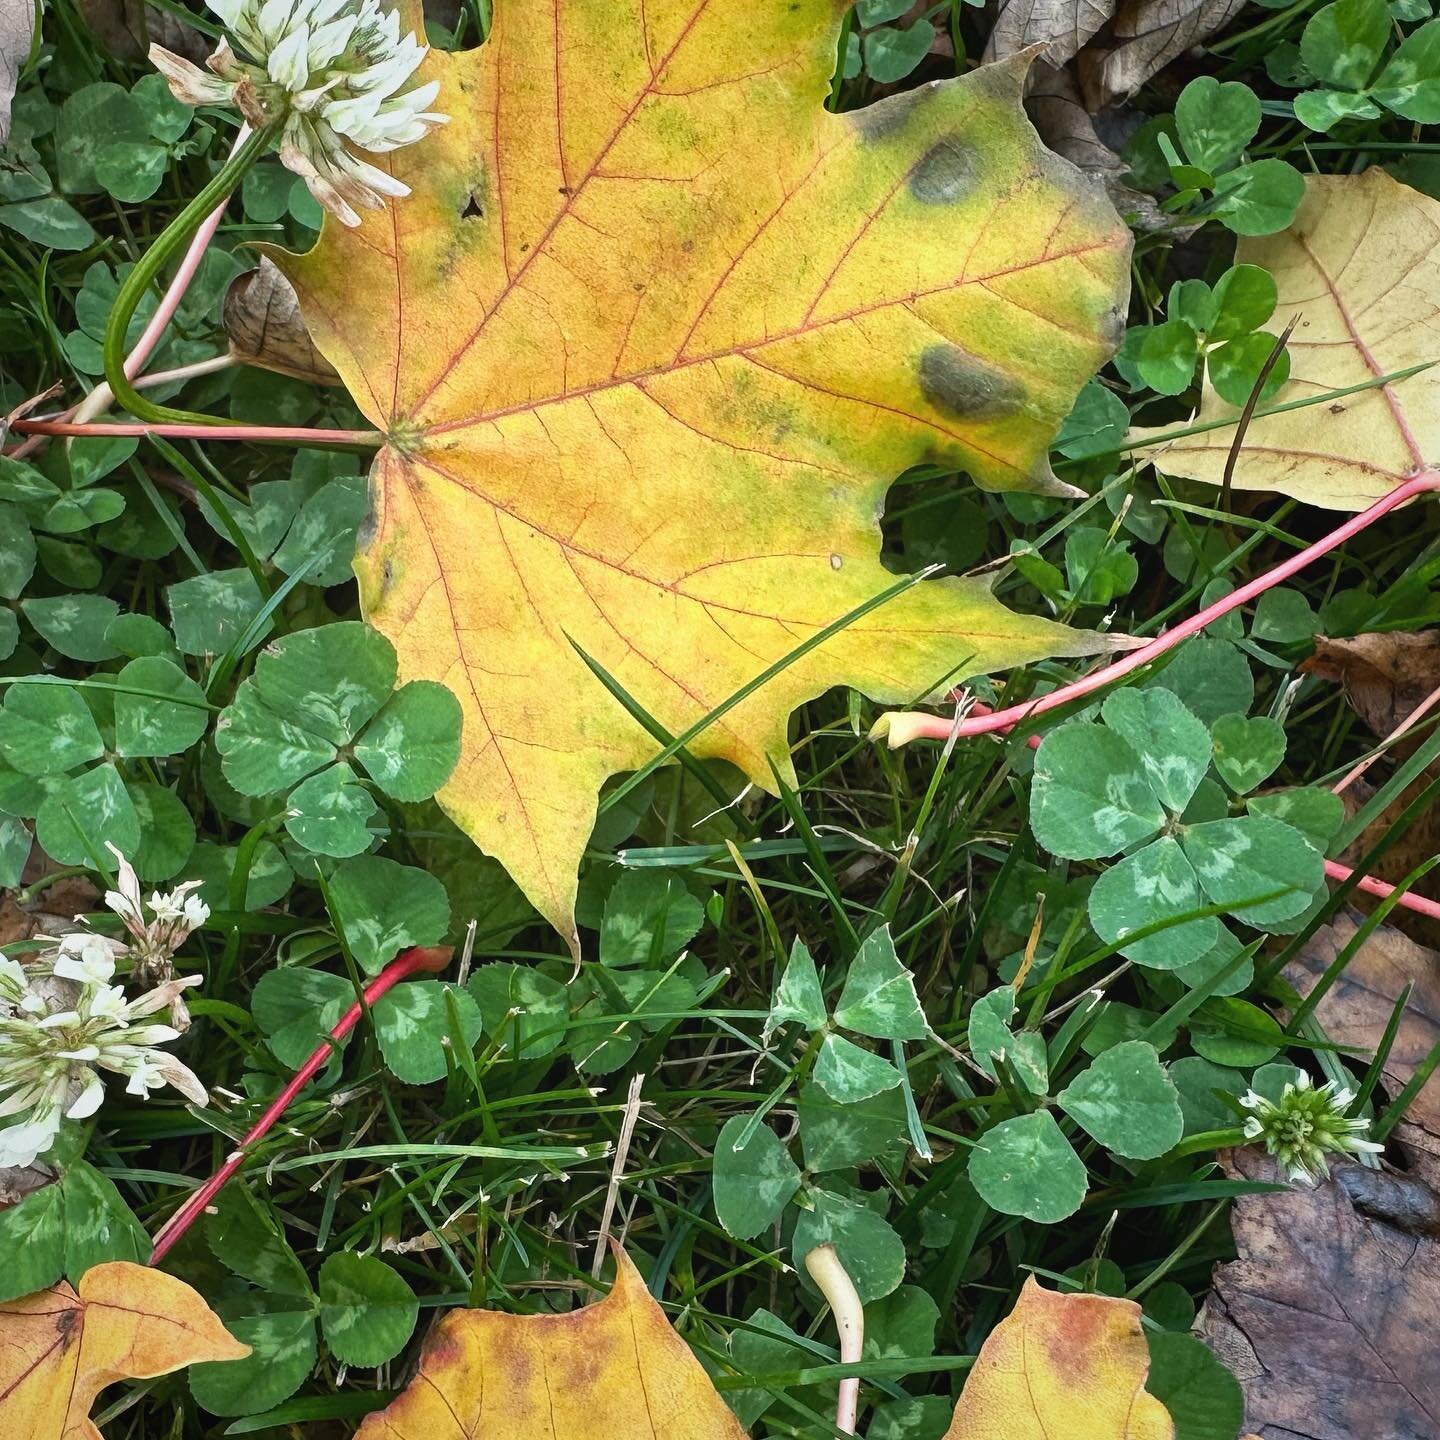 Fall clover hunting. The leaves in Wisconsin are stunning right now. Clovers are looking pretty good too. 🍀🍁🍂❤️